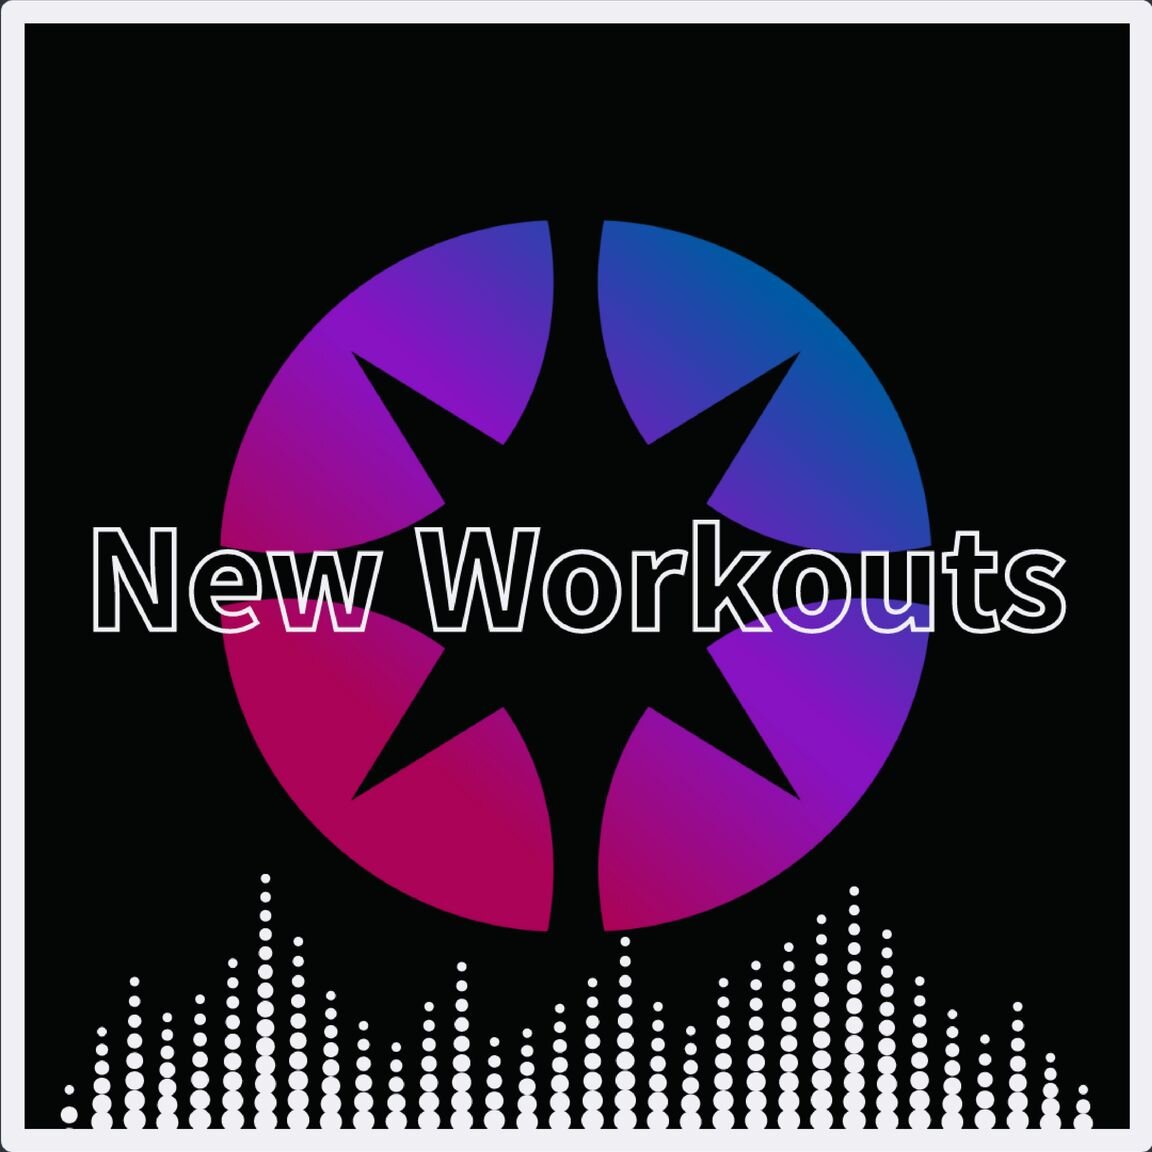 New workouts this week!

★ 45 min Outdoor Interval Run with Bethany
Music By:
Major Lazer ft. Justin Bieber &amp; M&Oslash;, Galantis,
The Chainsmokers ft. Phoebe Ryan, 
and Doja Cat ft. Nicki Minaj

★ 30 min Beats Ride with Brad
Music By:
Martin Sol